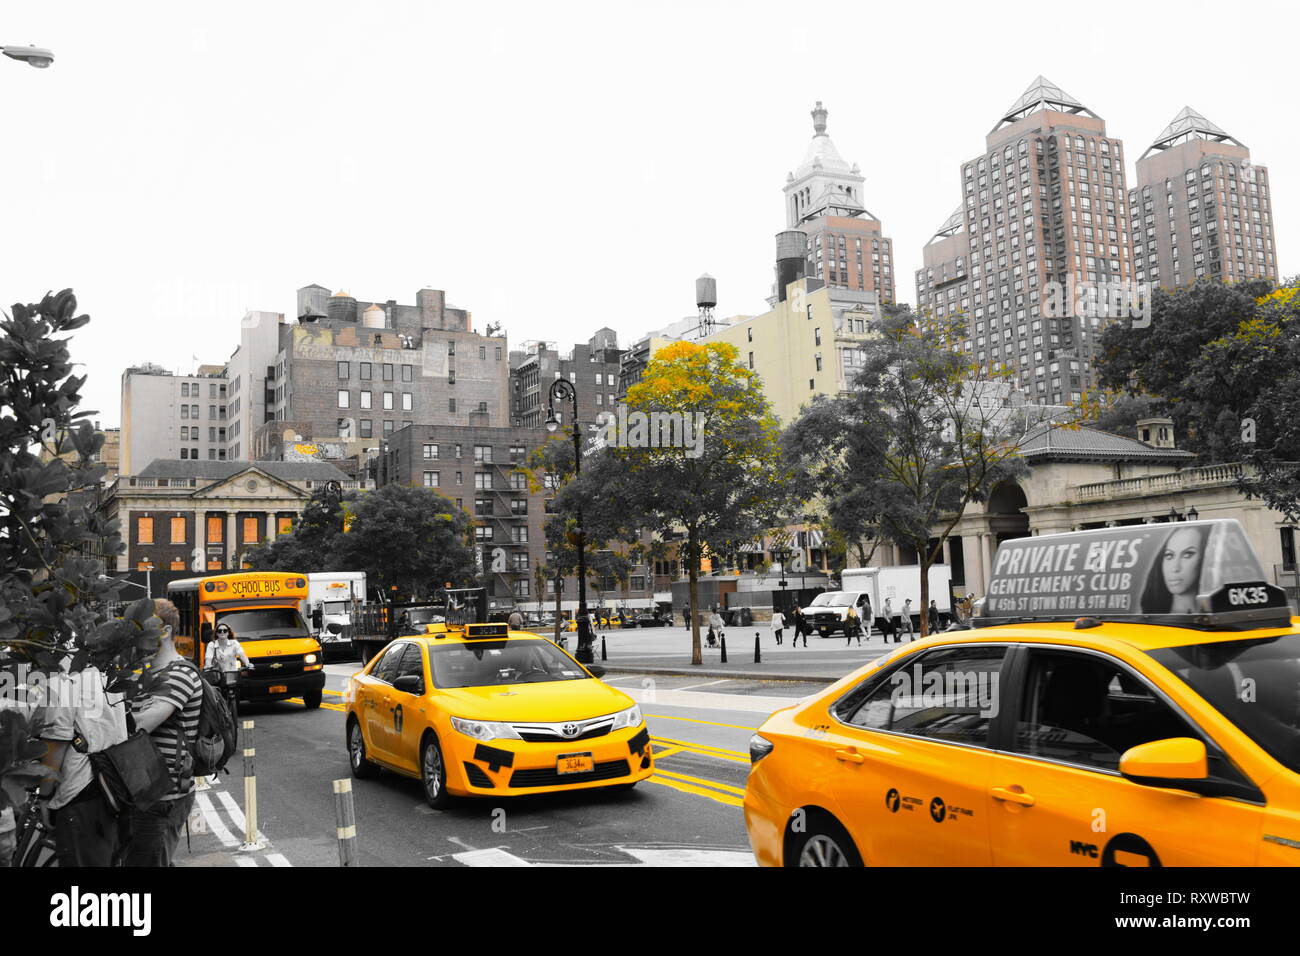 new york city - union square yellow taxi cabs Stock Photo